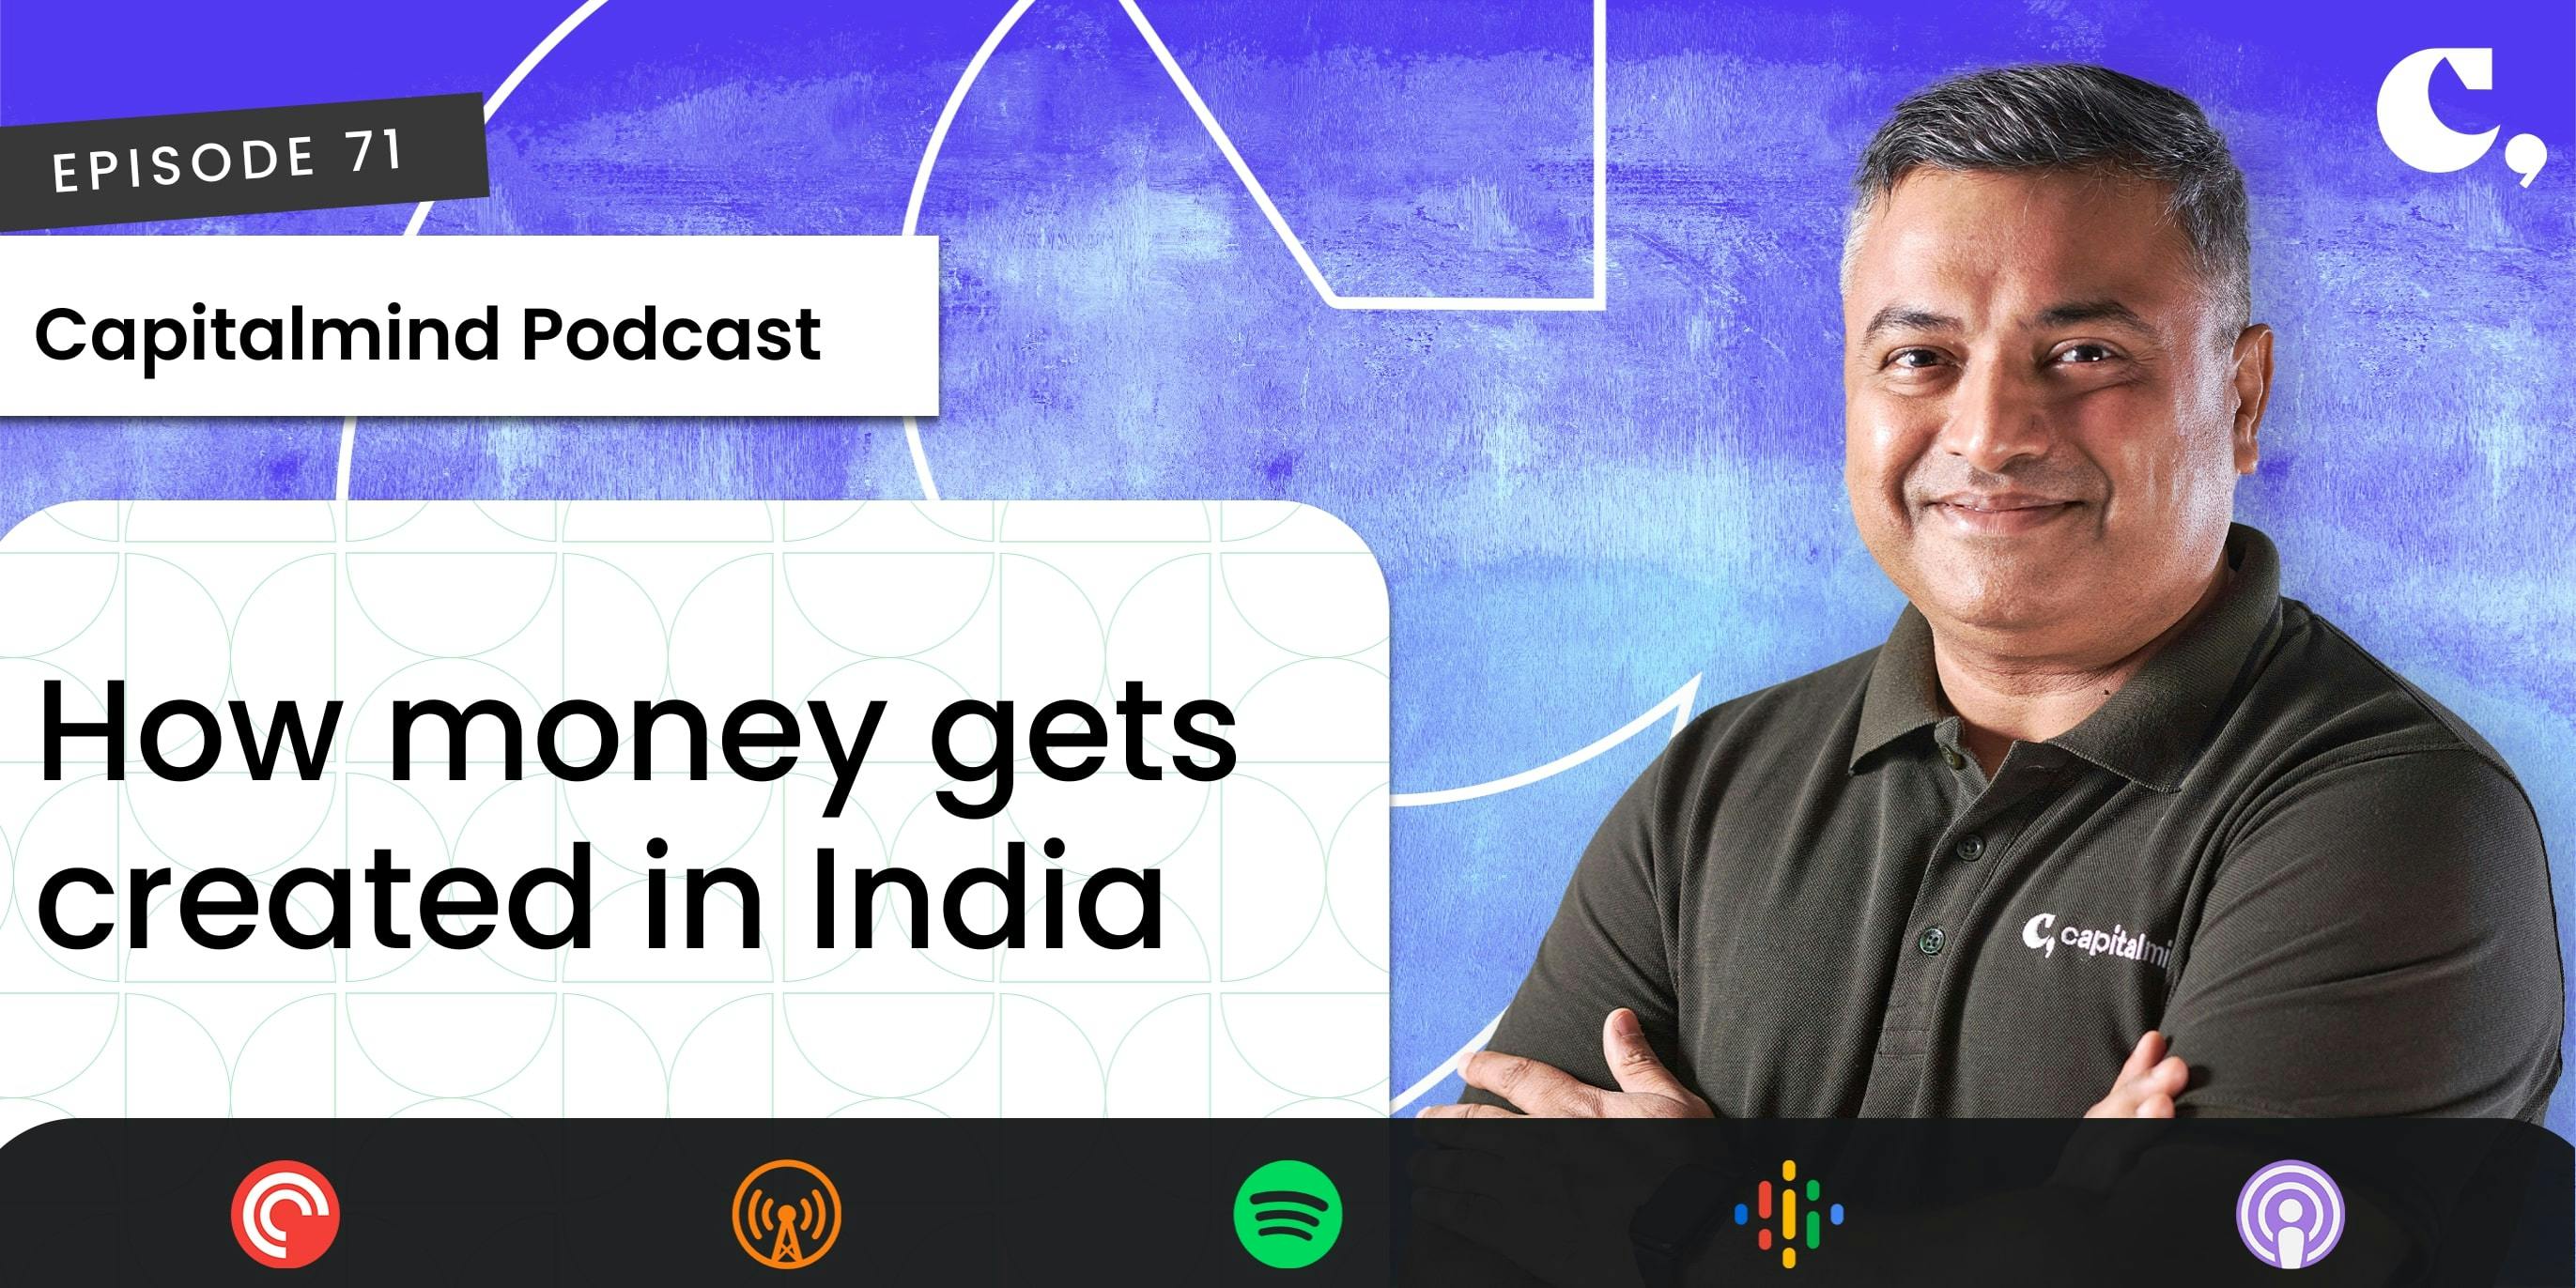 [Podcast] How money gets created in India